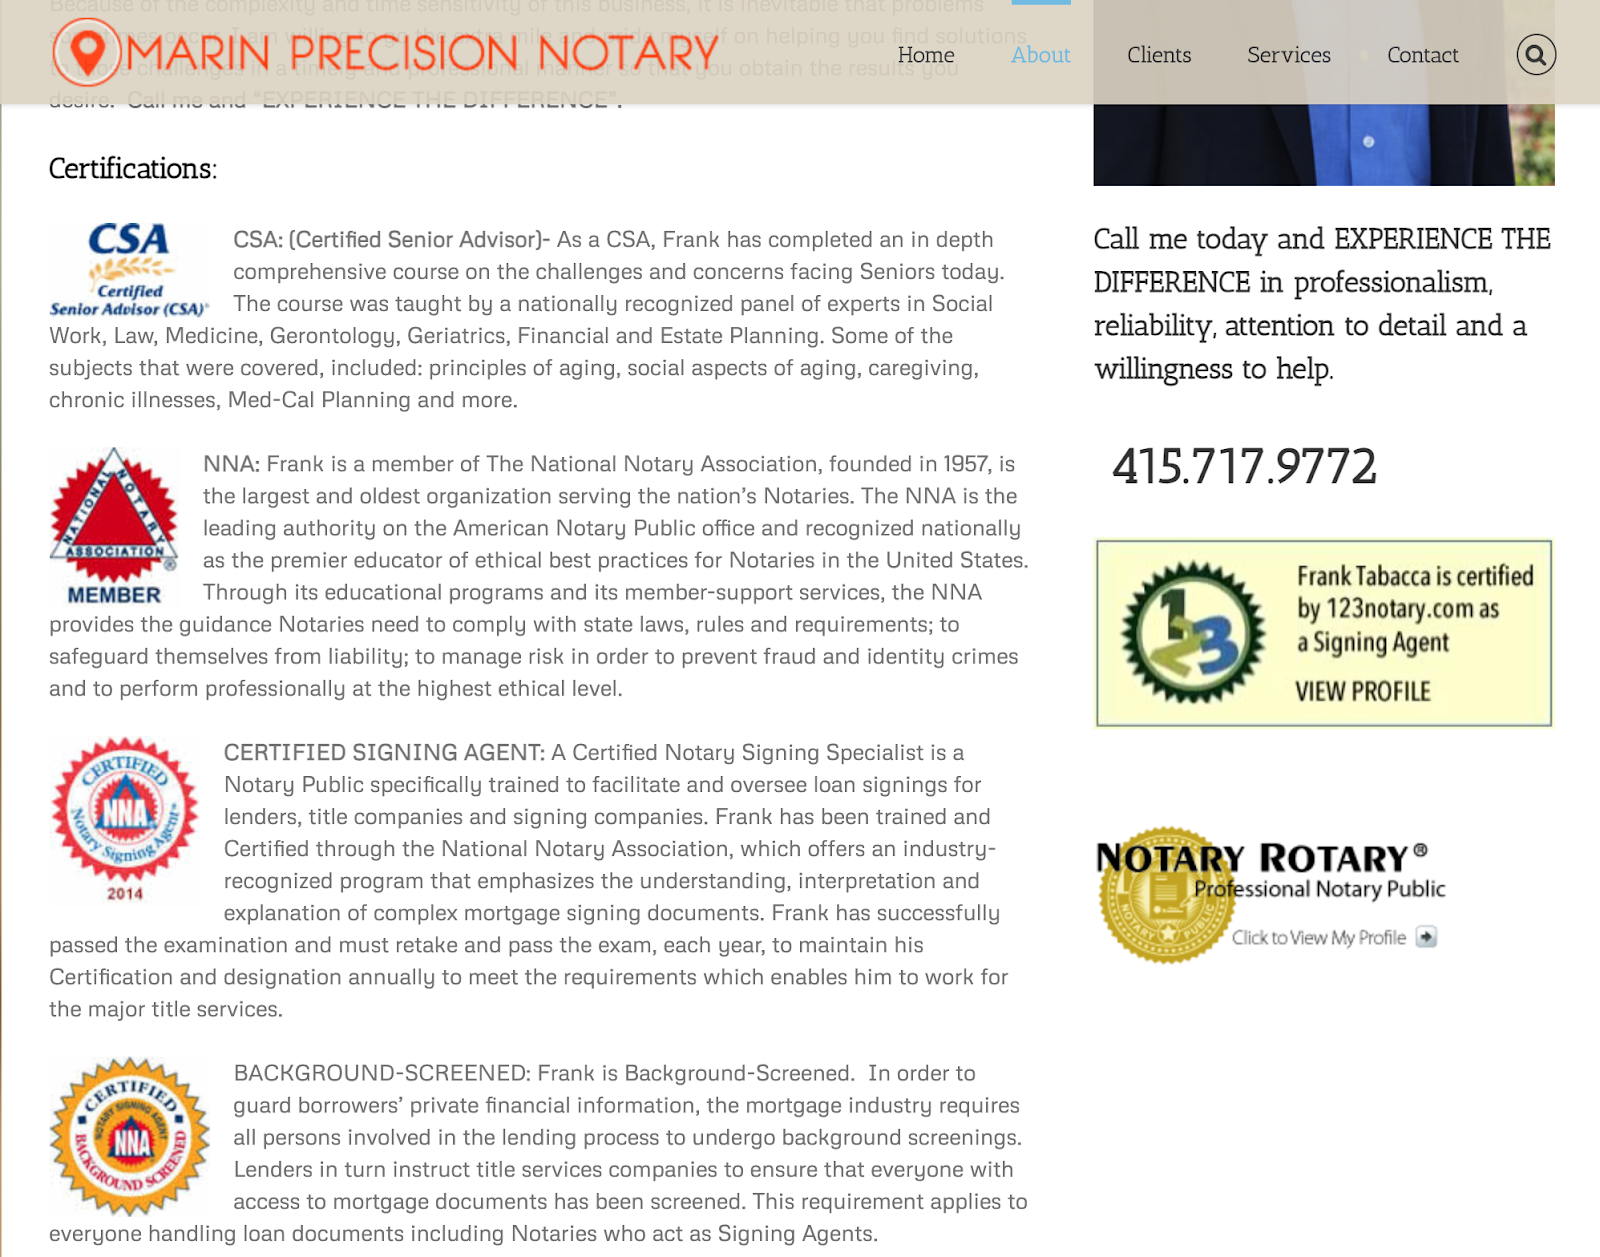 mobile notary services business plan